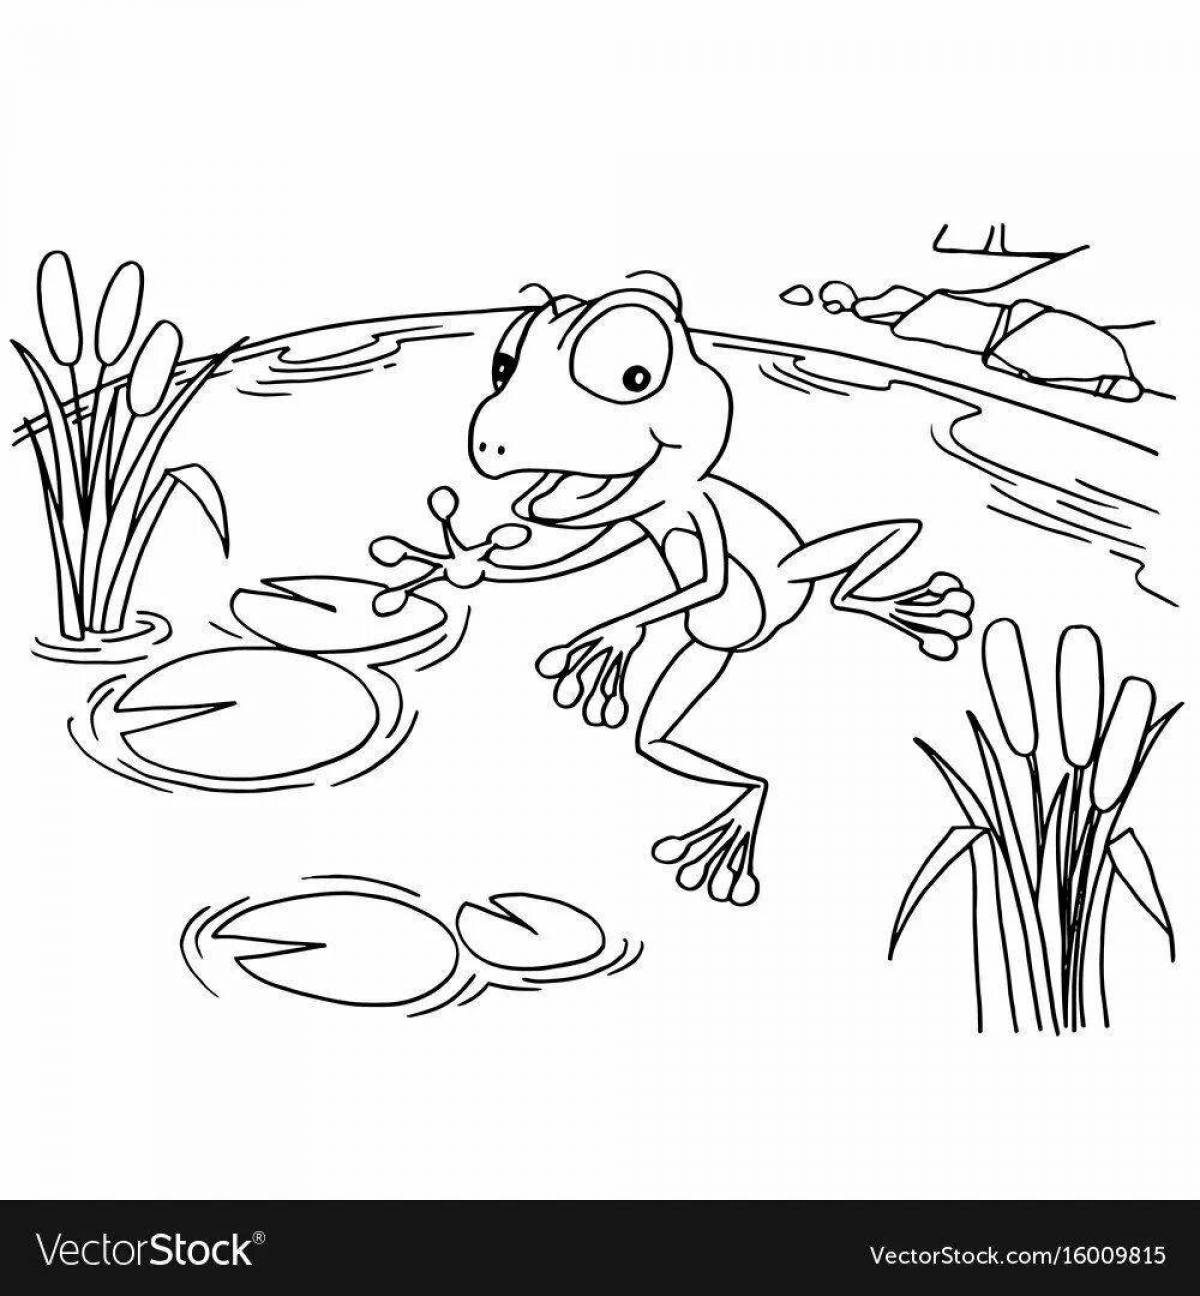 Amazing travel frog coloring page